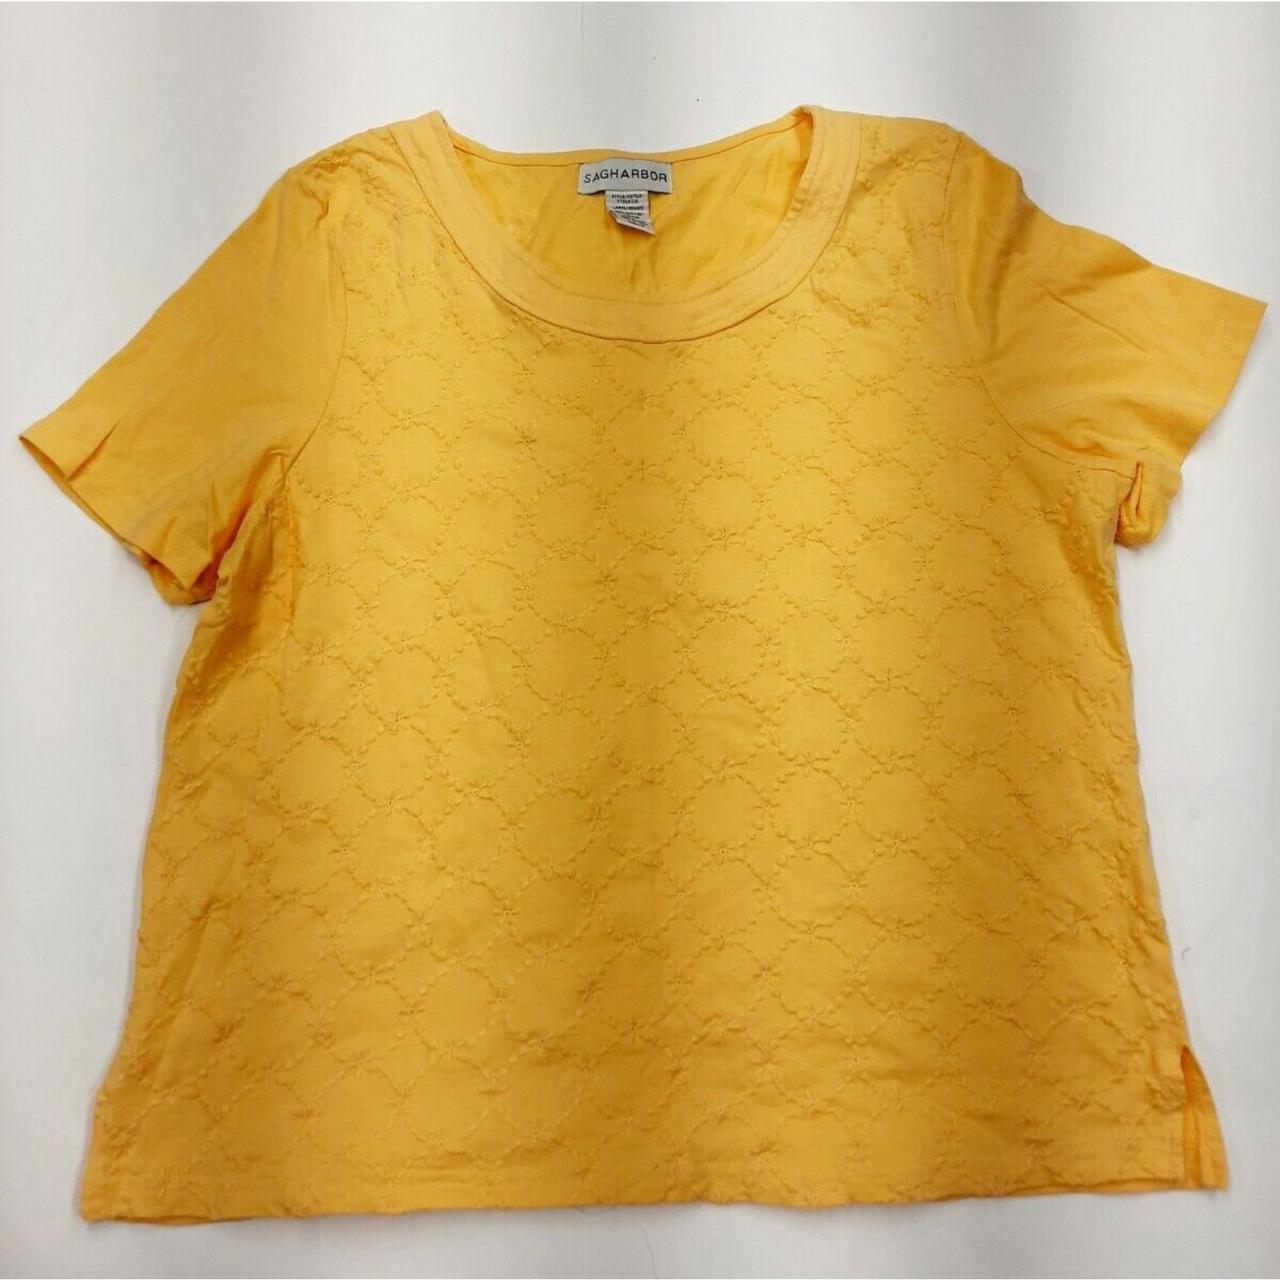 Sag harbor Embroidered T Shirt Yelow 100% Cotton... - Depop